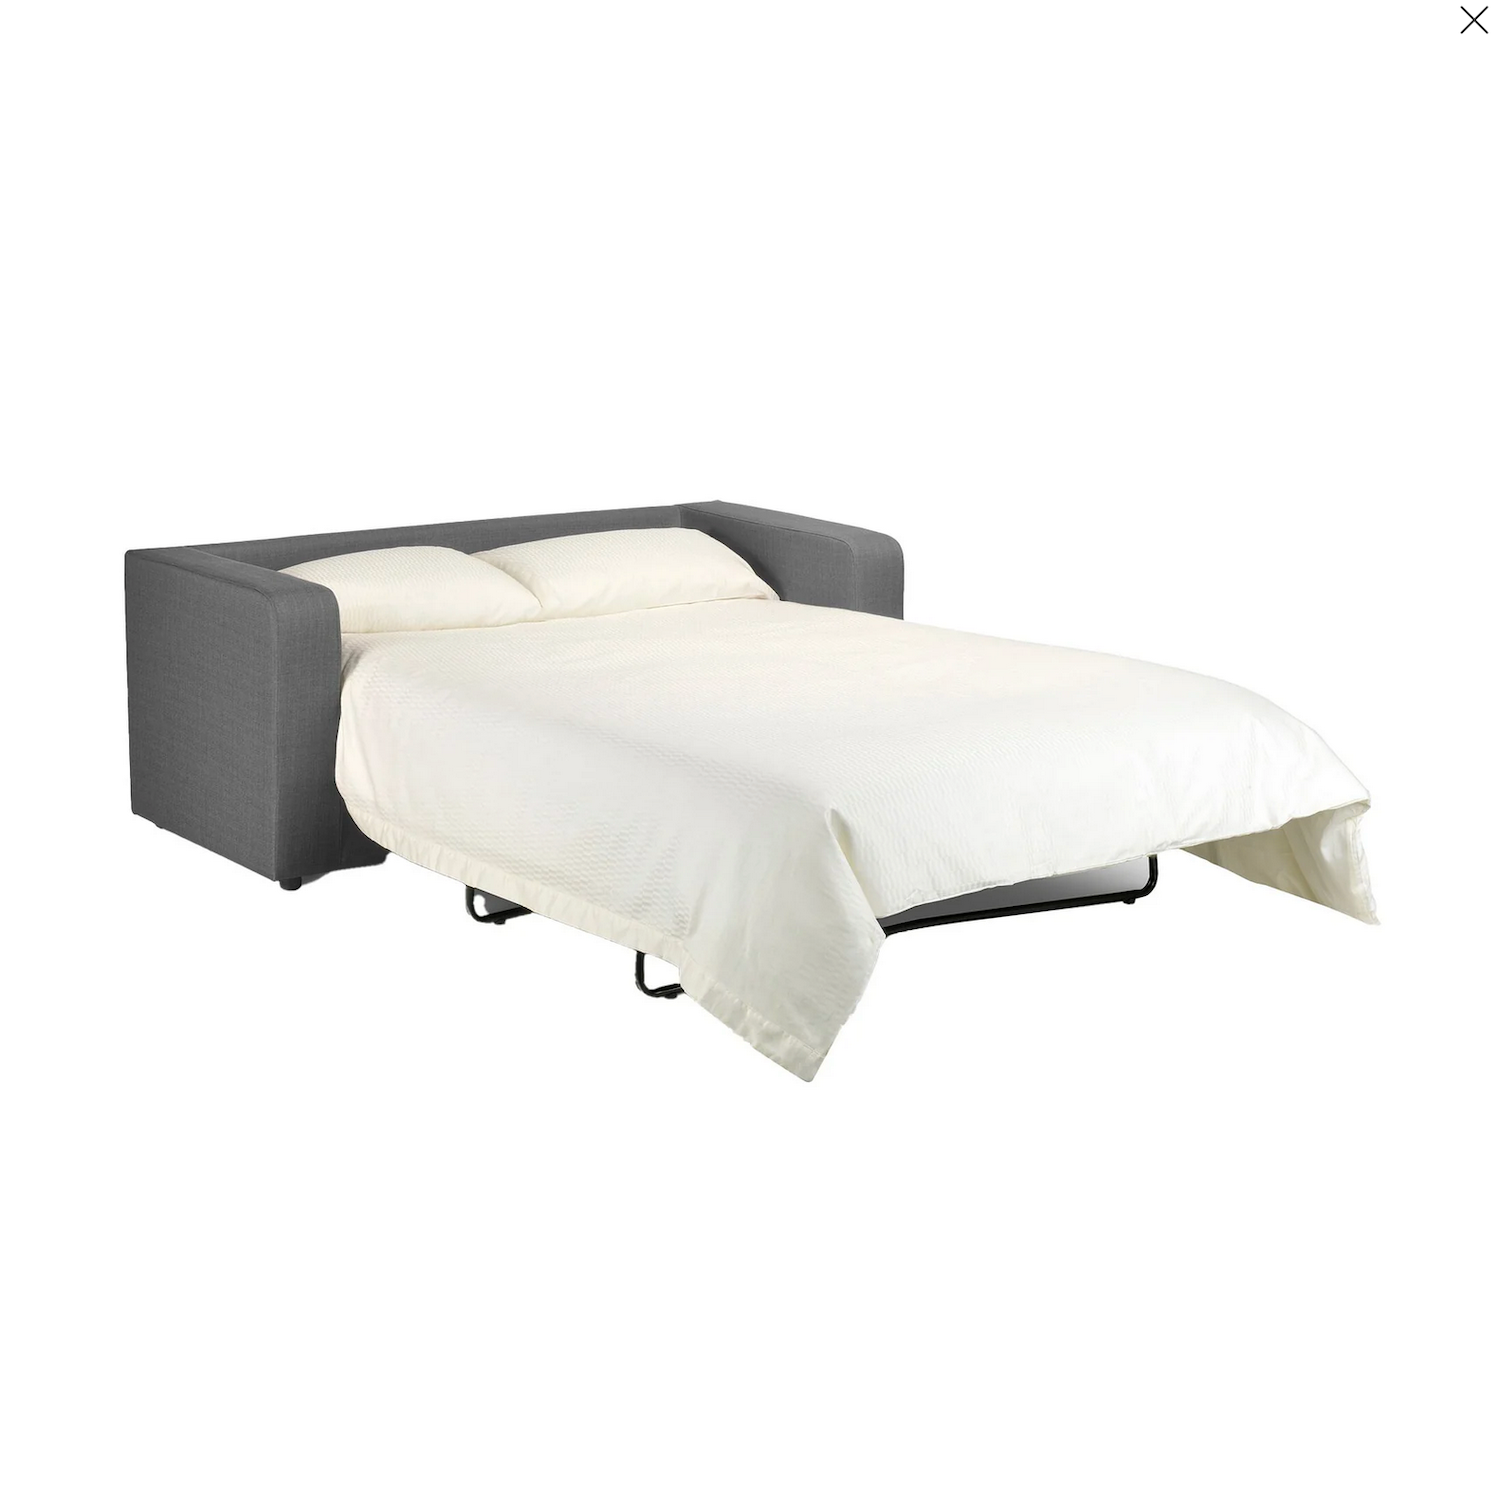 Chicago 2 Seater Compact Fabric Sofa Bed